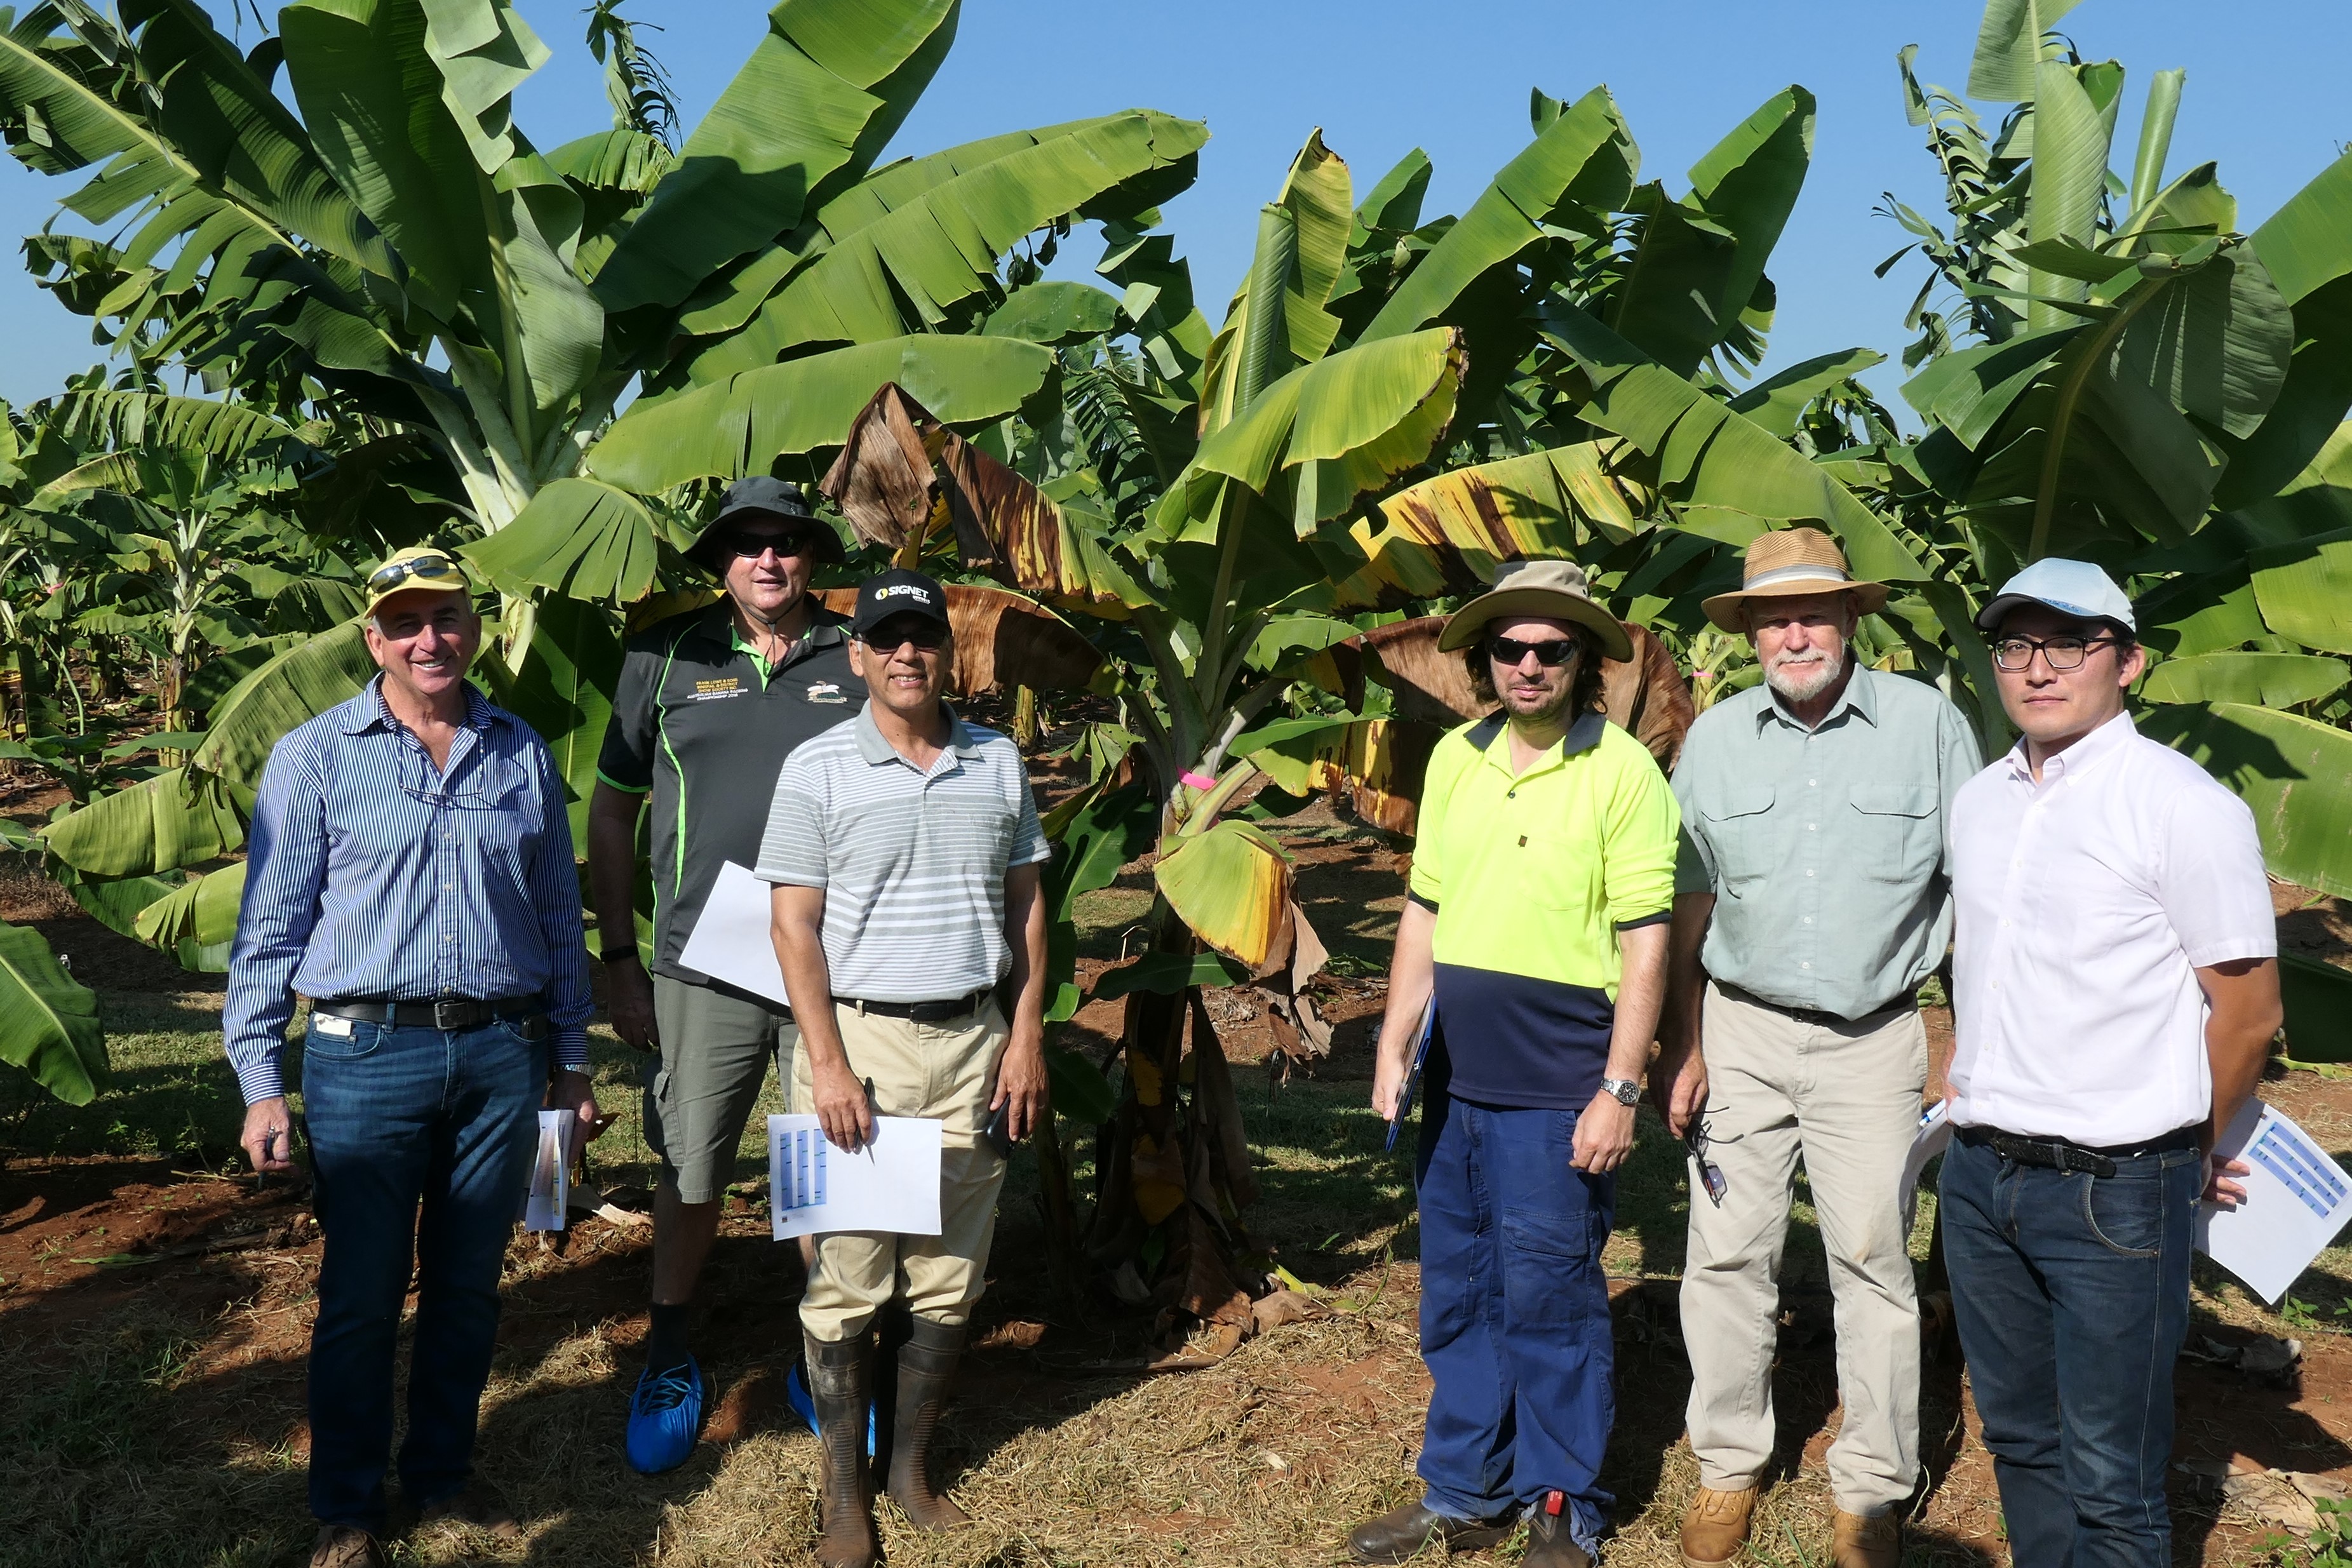 Following the Australian Banana Industry Congress in May a few delegates, including some from overseas, visited the TR4 disease screening sites at Coastal PlainsResearch Farm, NT. They were impressed with trial progress, saying the ‘world is watching’ Australia’s efforts to curb the effects of this global menace with interest.
L-R: Marc Jackson (Fyffes, Costa Rica), Stewart Lindsay (Queensland DAF), Roberto Young (Dole, Honduras), Sharl Mintoff (NTDPIR), Bob Williams (consultant) and
Yuji Habomoto (Fyffes, Costa Rica).